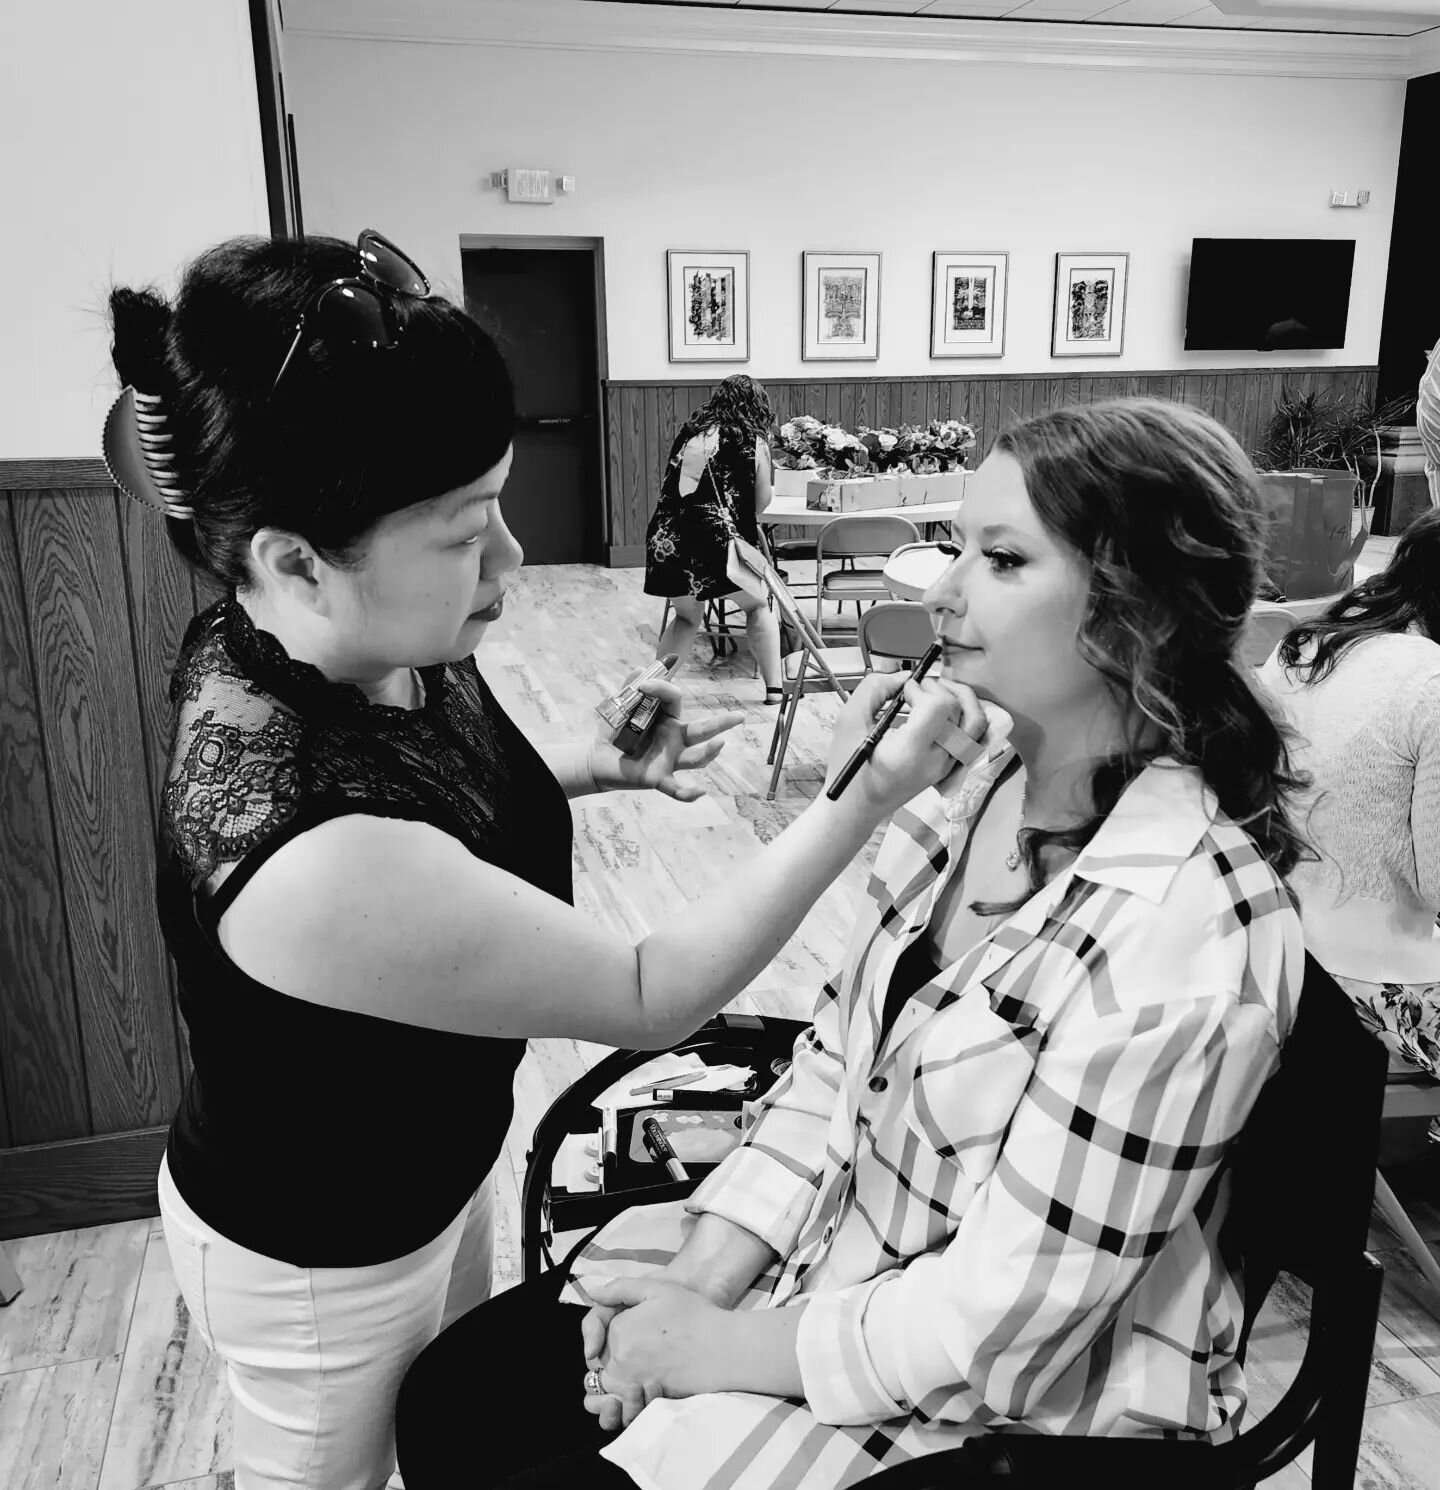 The last touch before she gets into her bridal dress. Congratulation Mary!

#weddingday #weddinddaymakeup #wimakeupartist